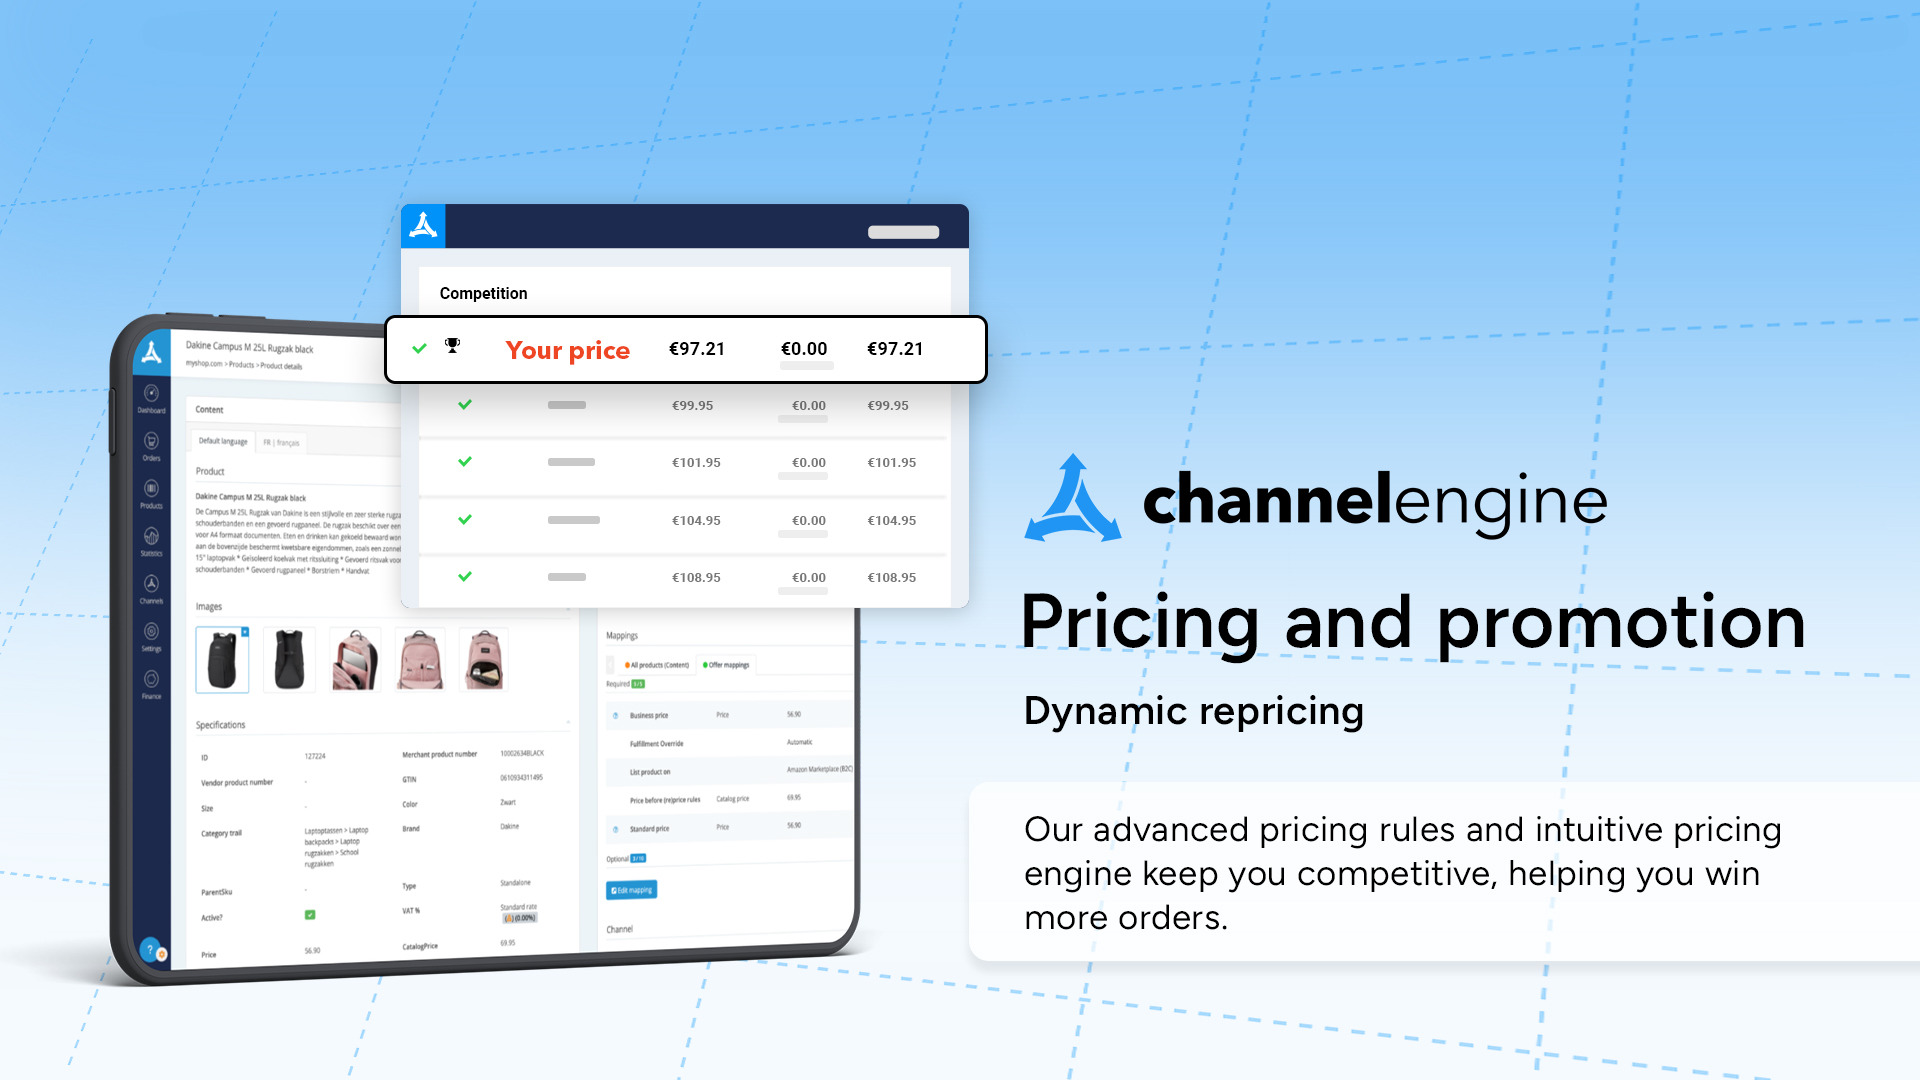 Our advanced pricing rules and intuitive pricing engine keep you competitive and make you win more orders.